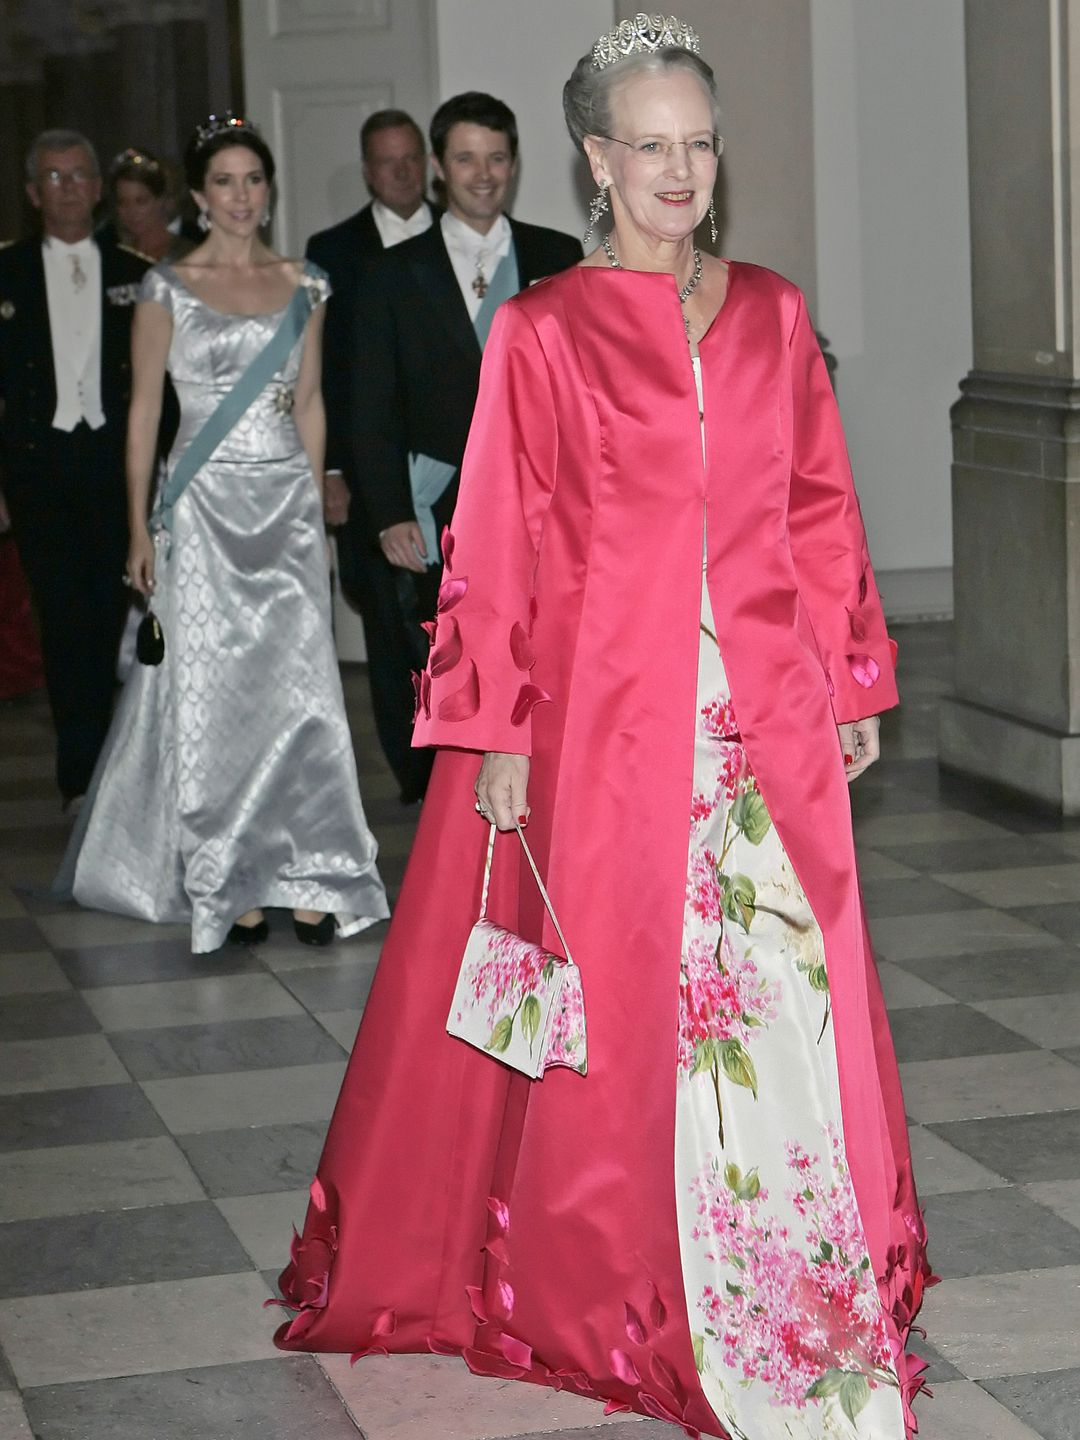 Queen Margrethe attends her sons wedding wearing a floral gown and bright pink overcoat 